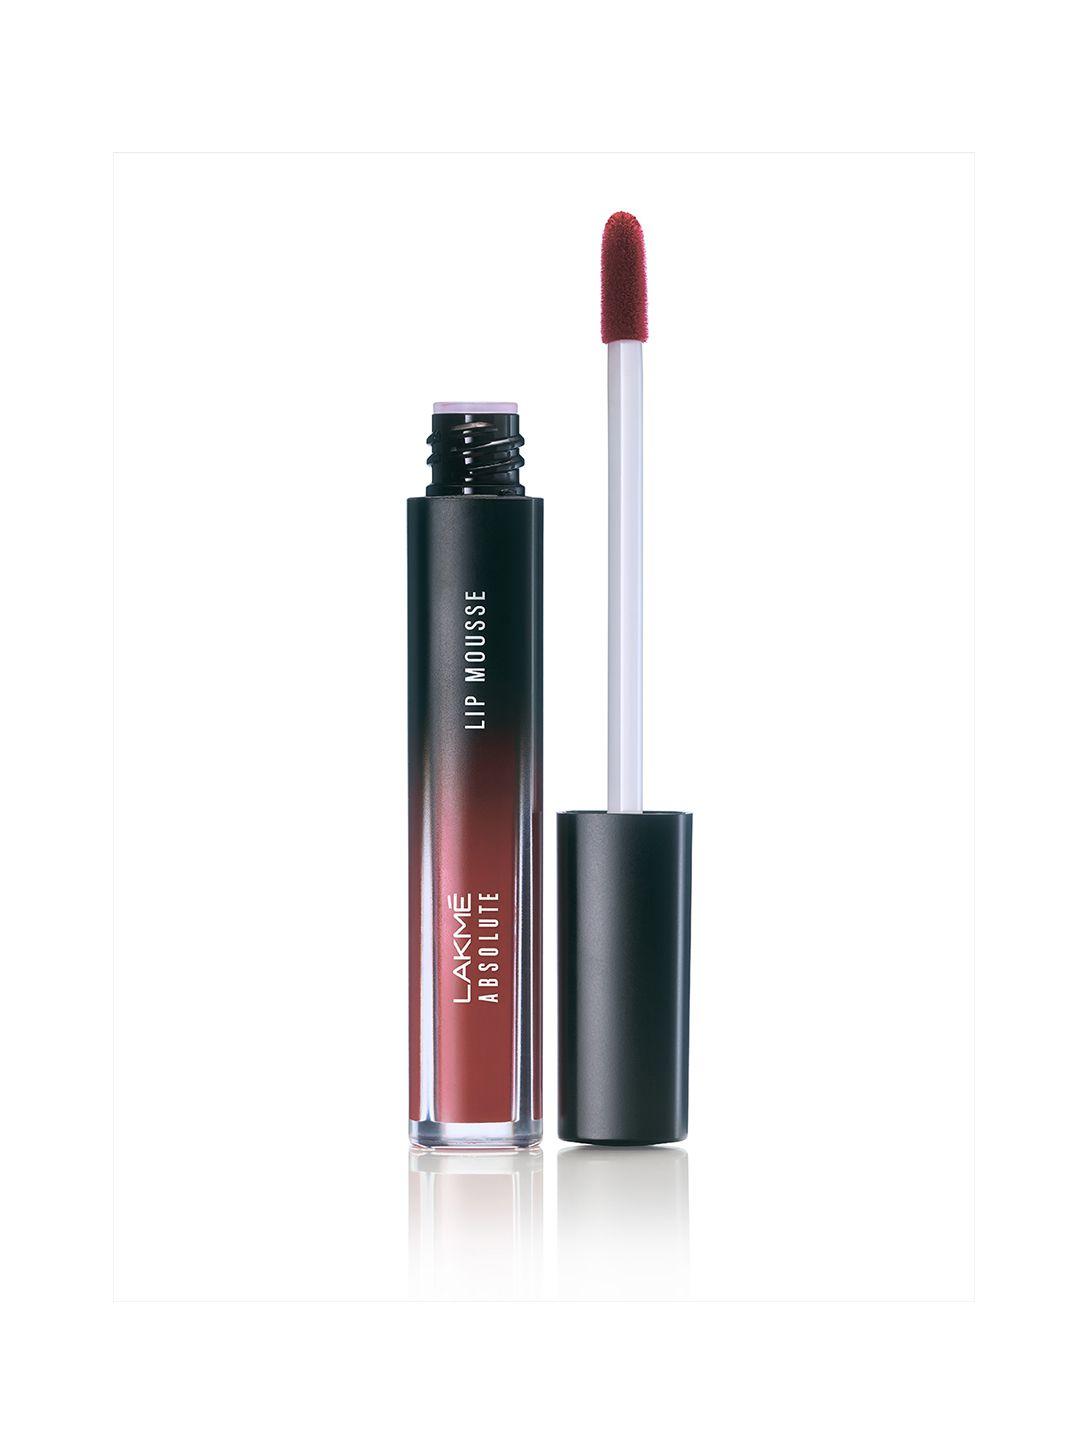 Lakme Absolute Sheer Lip Mousse - Chocolate Temptation 304